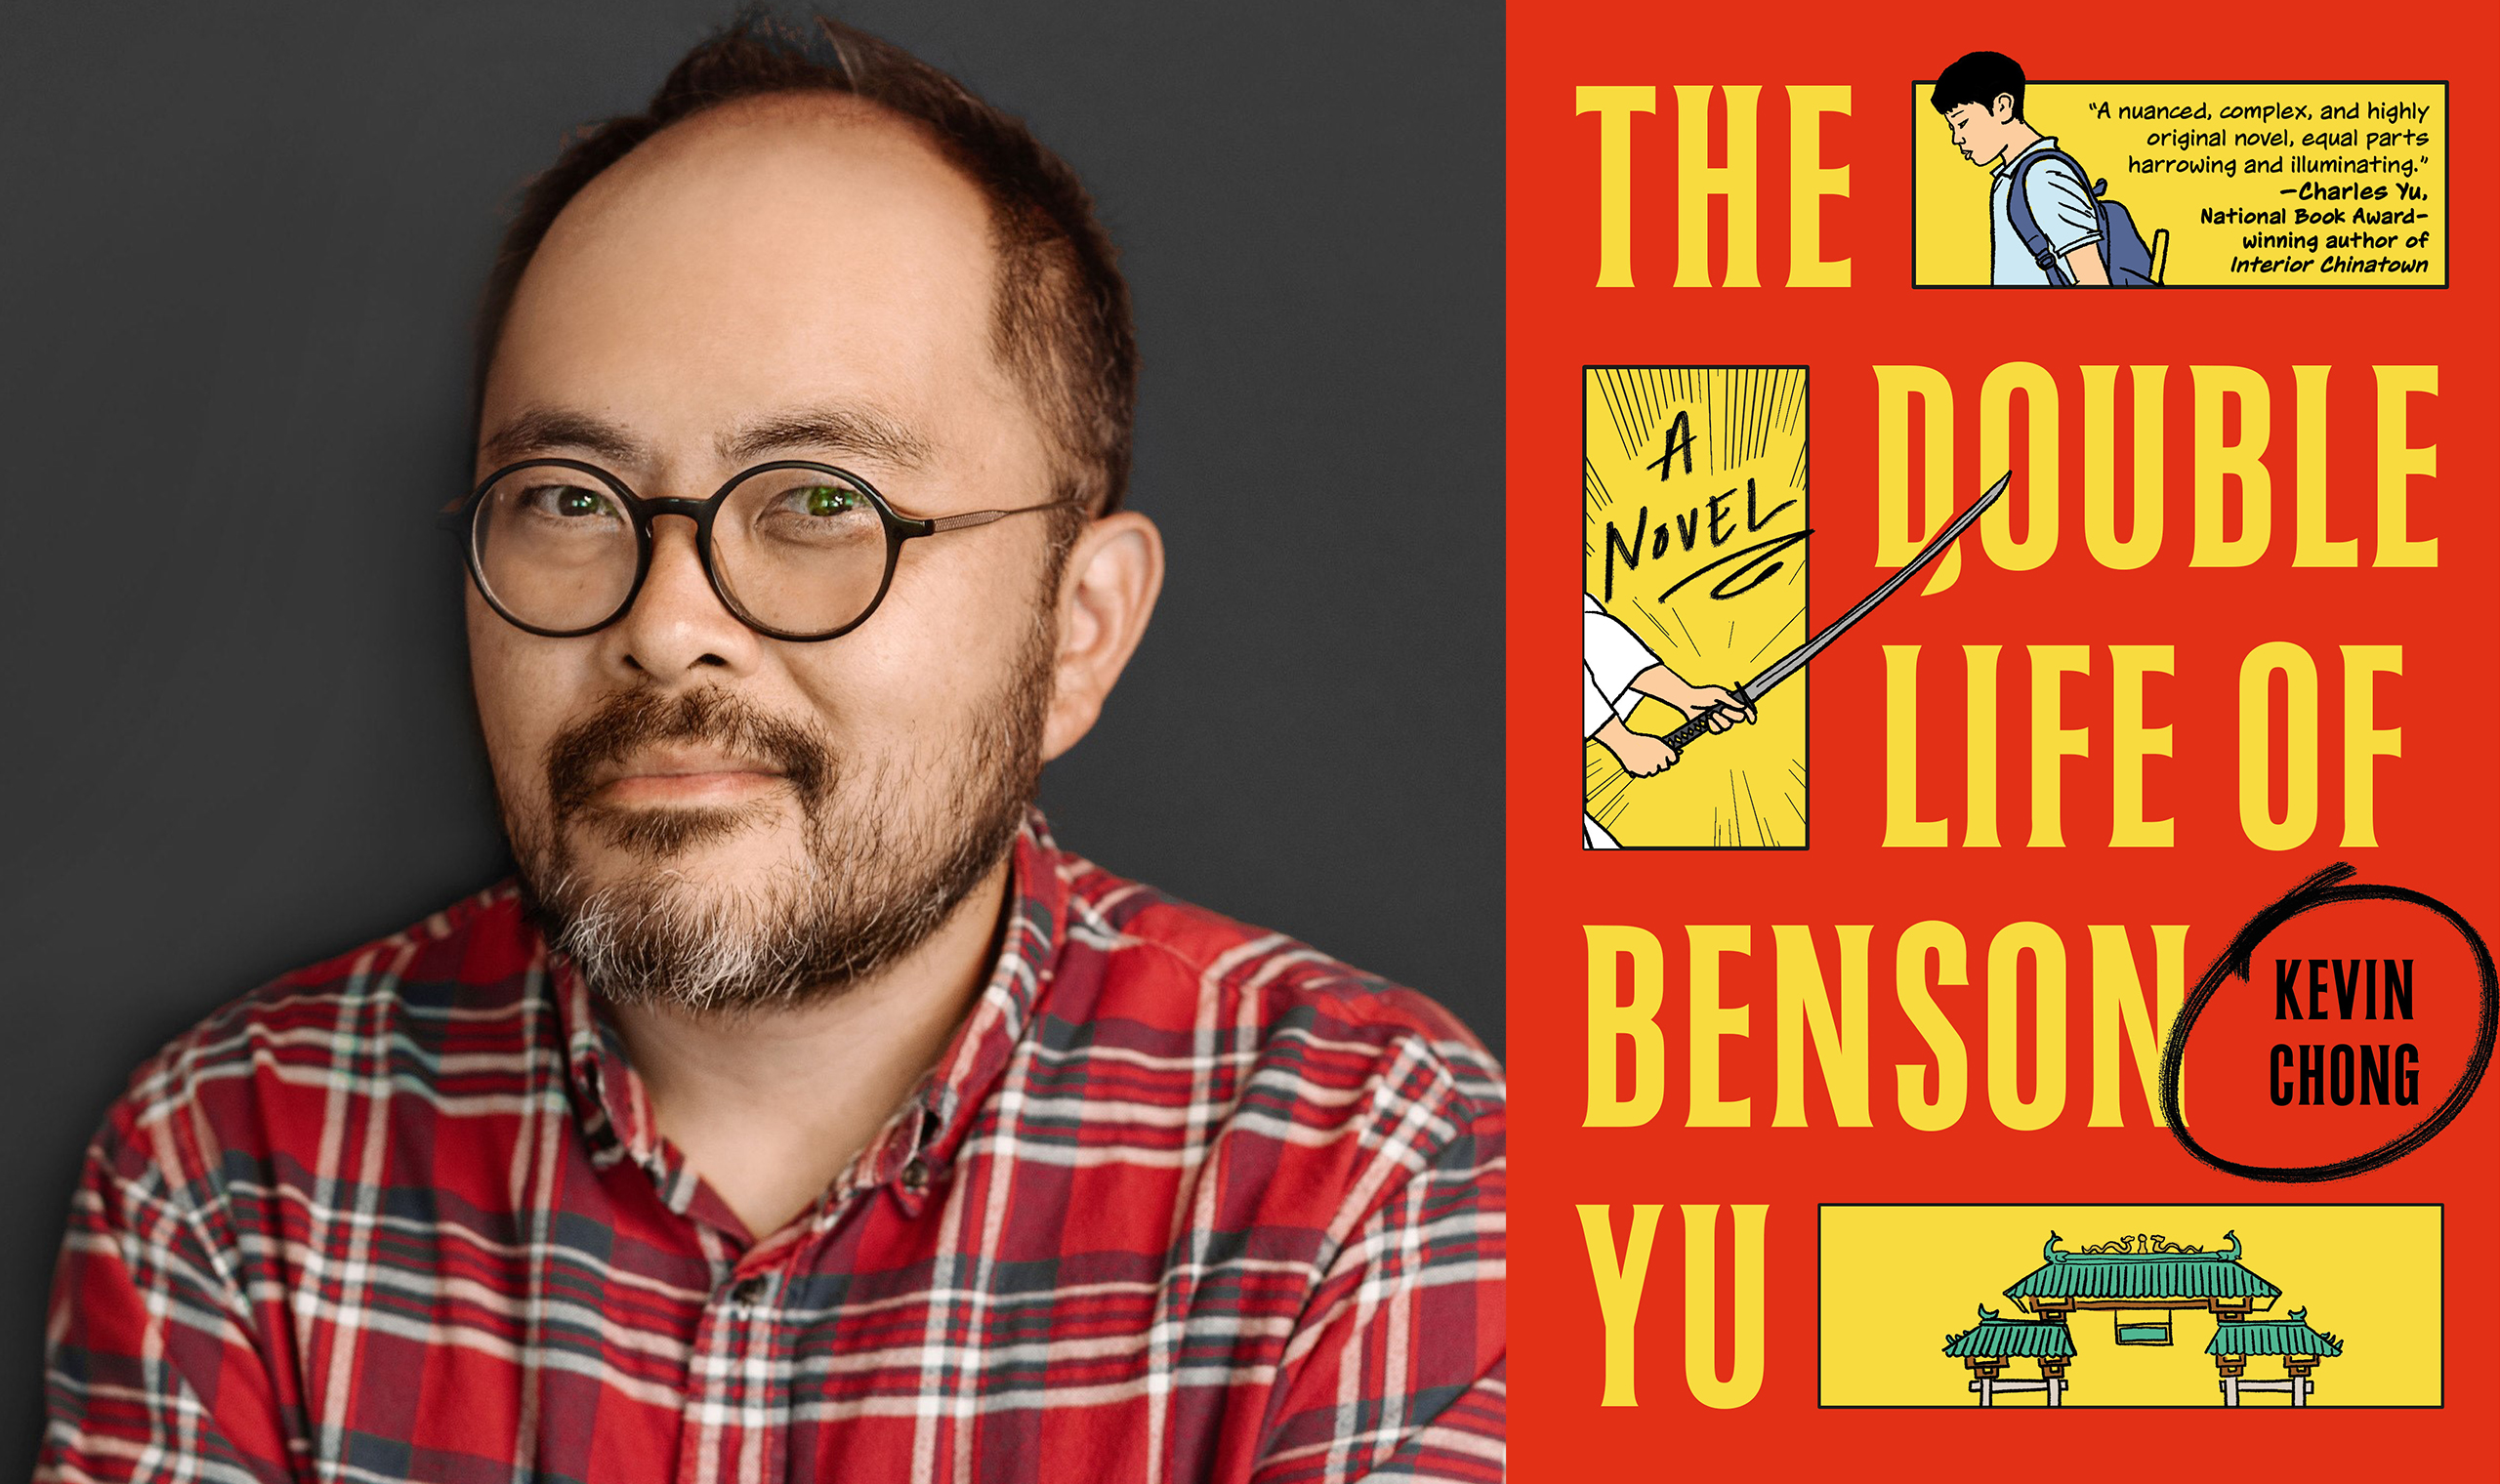 Kevin Chong's headshot beside the cover of The Double Life of Benson Yu